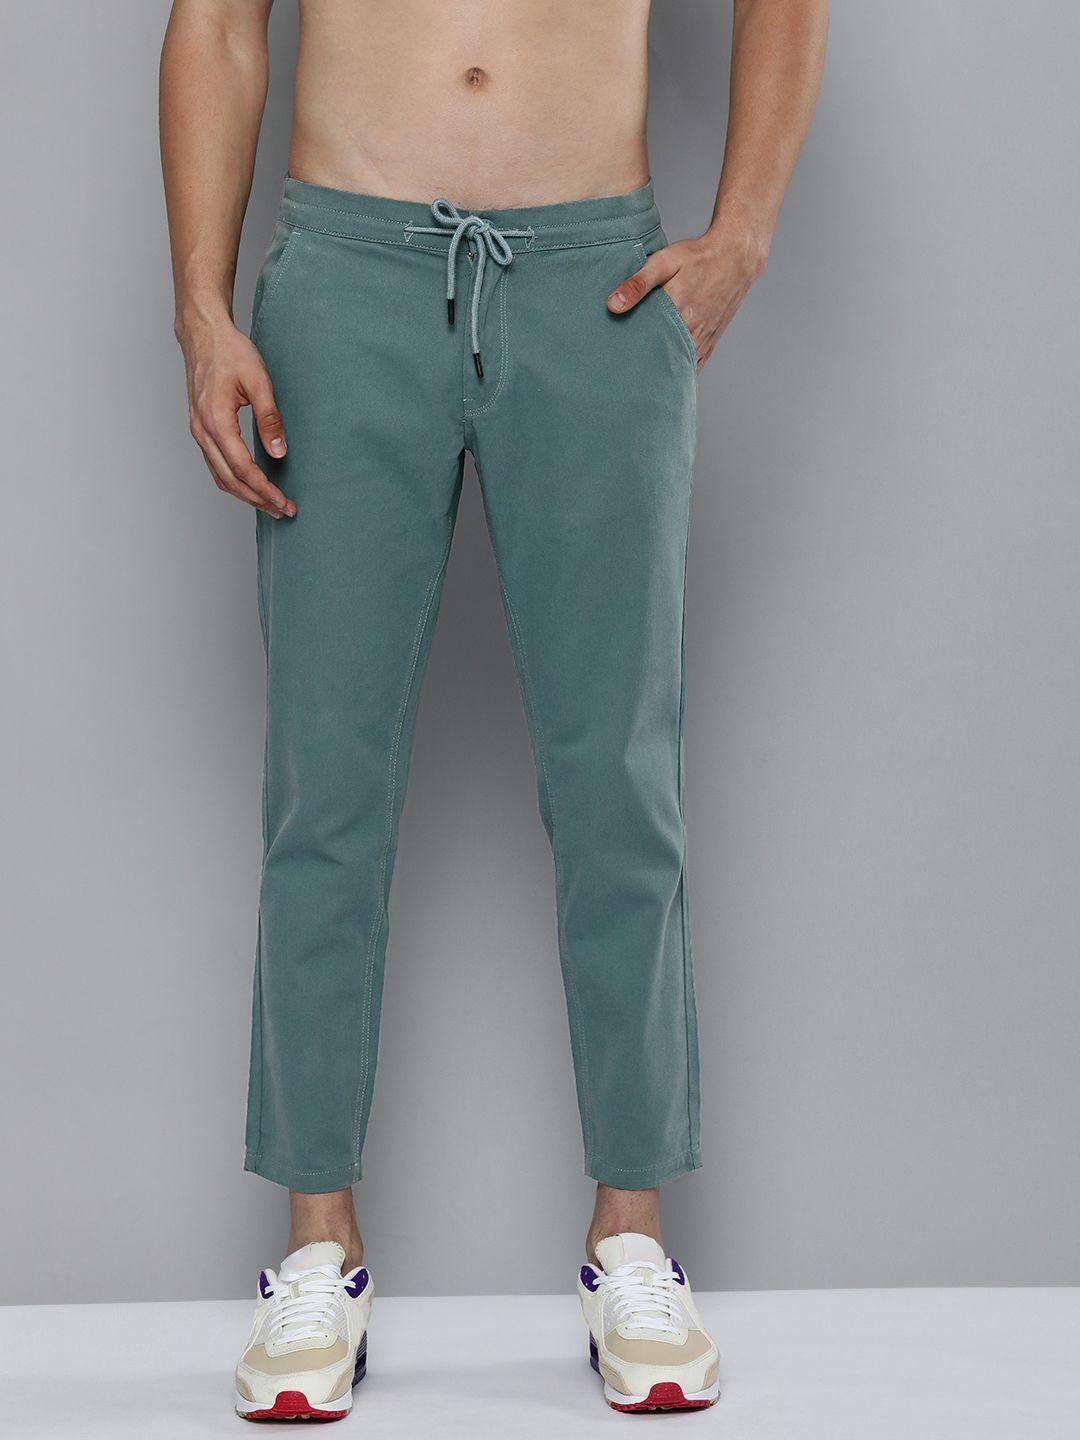 here&now-men-teal-green-cropped-regular-trousers